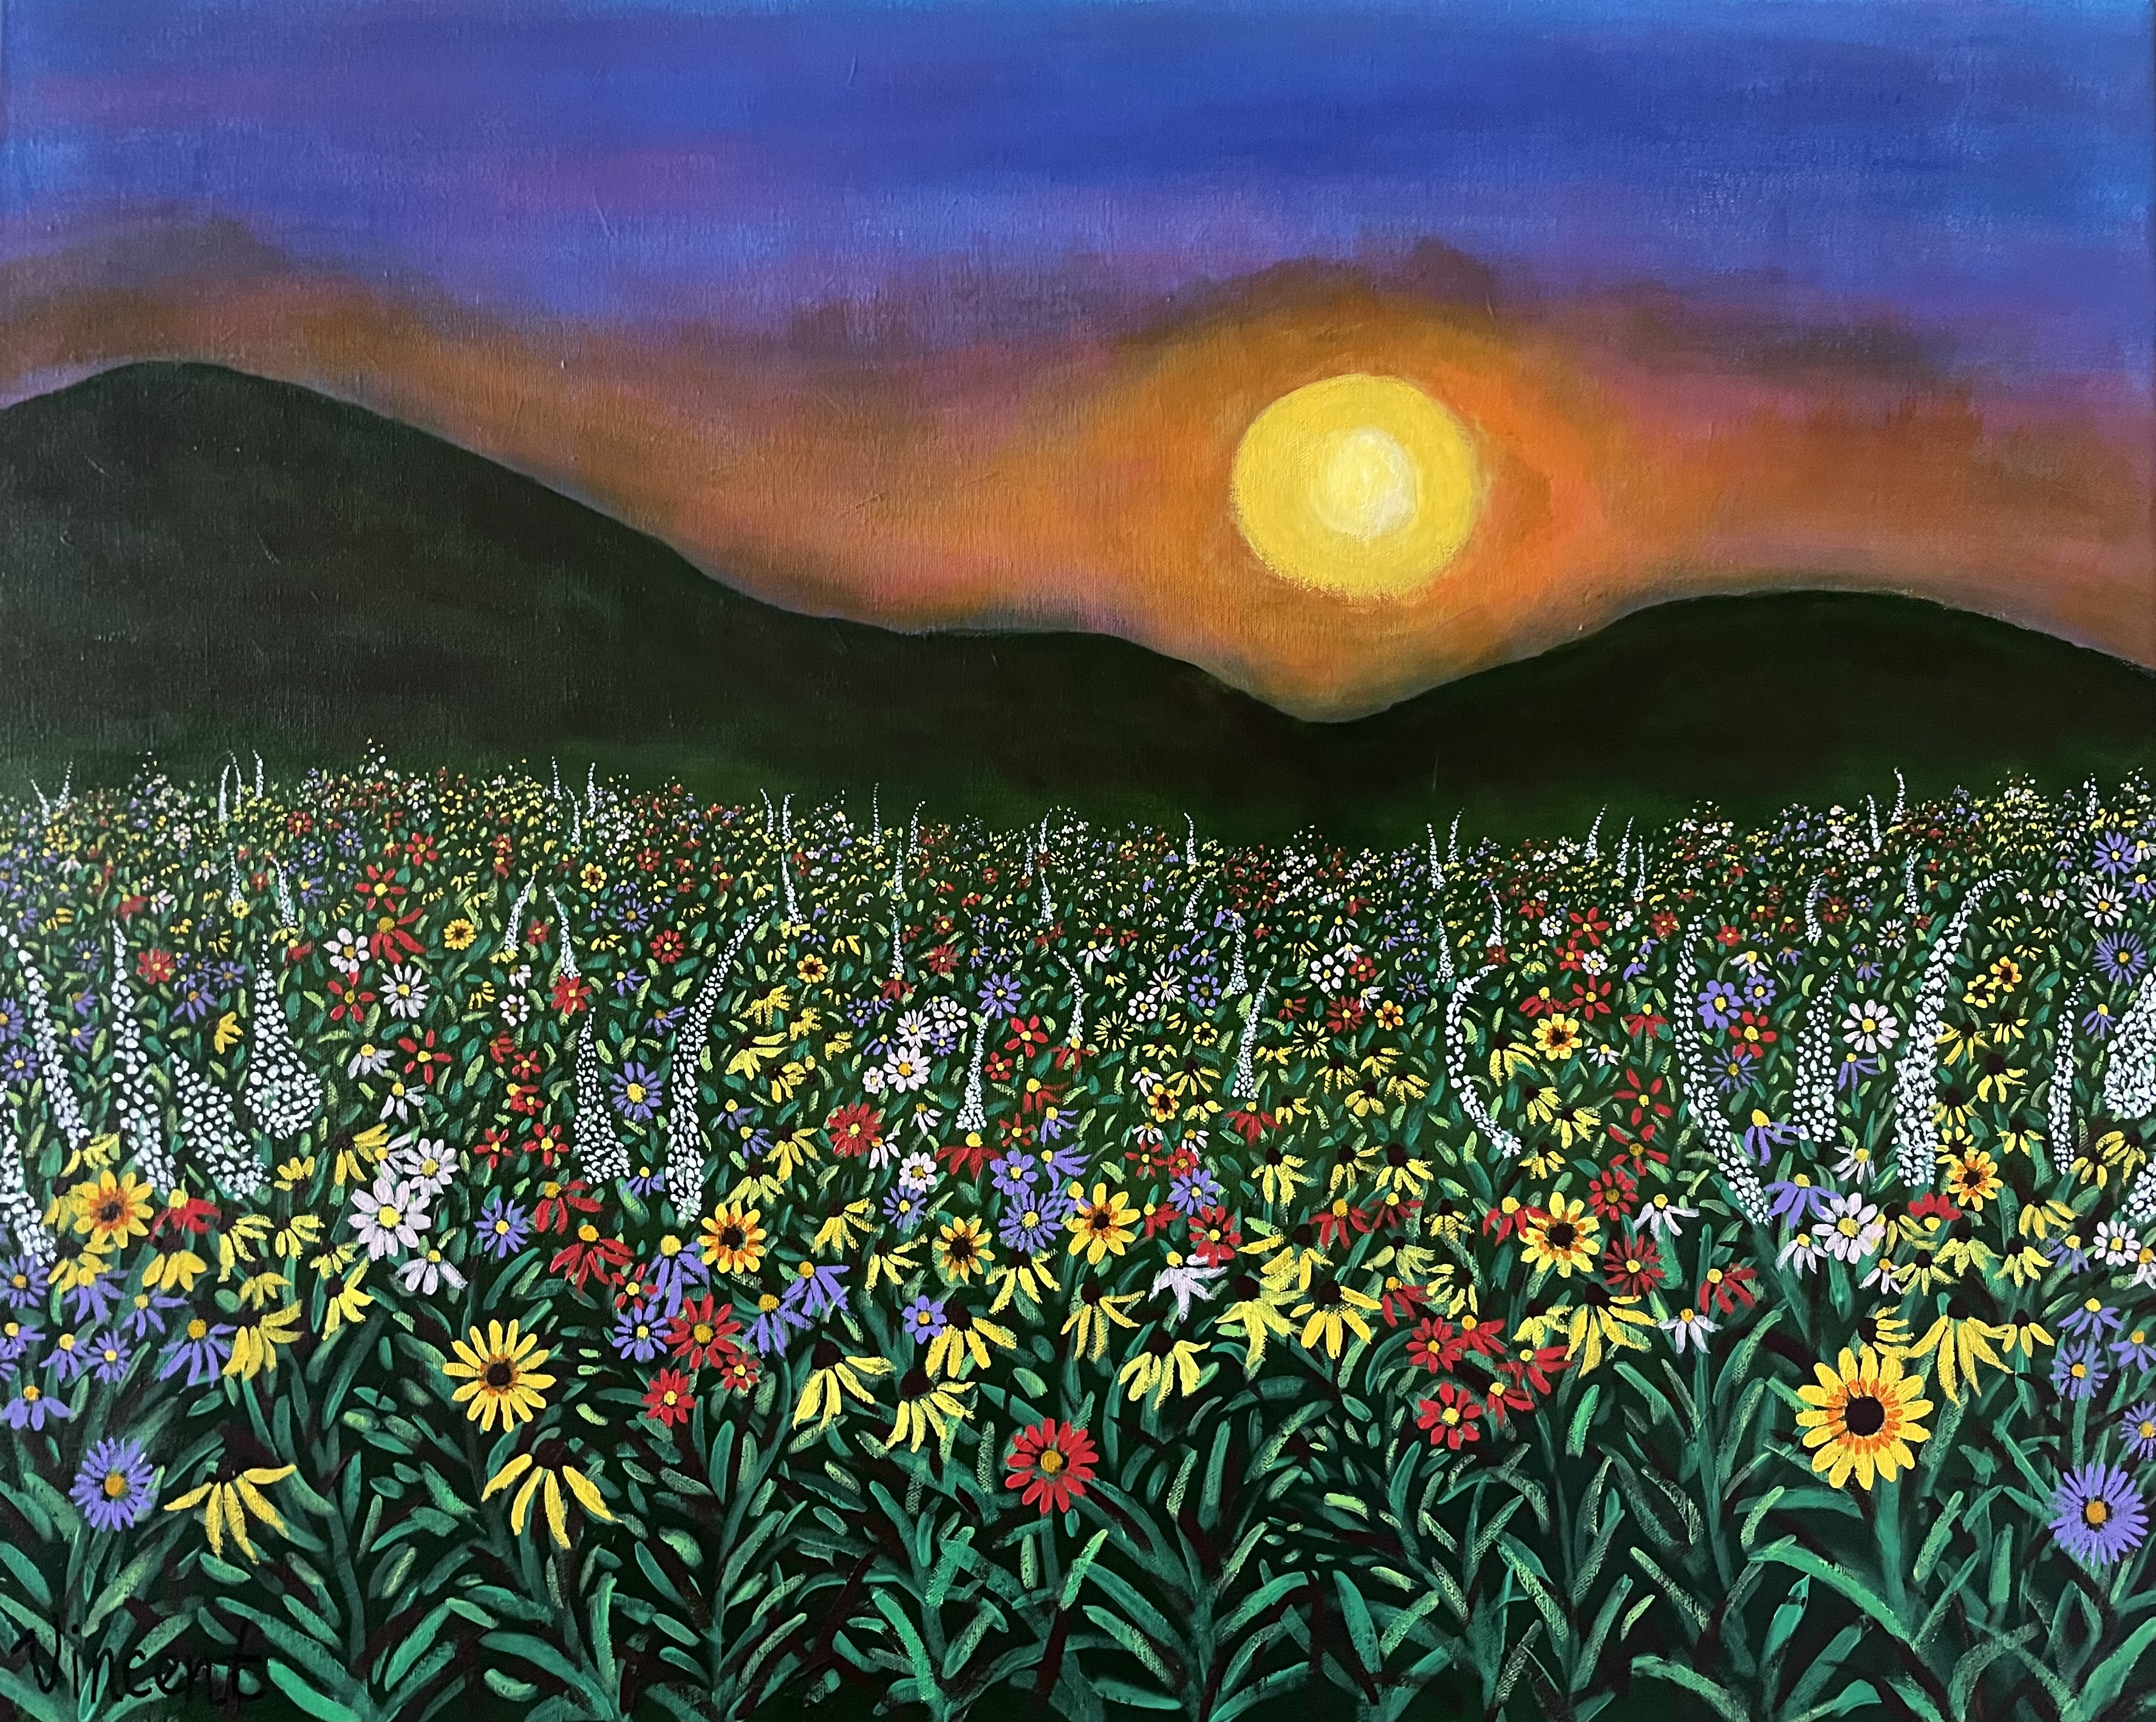 Colorful painting of field of flowers in red, white, yellow, and purple against a dark mountain range with the sun low in a red and blue sky